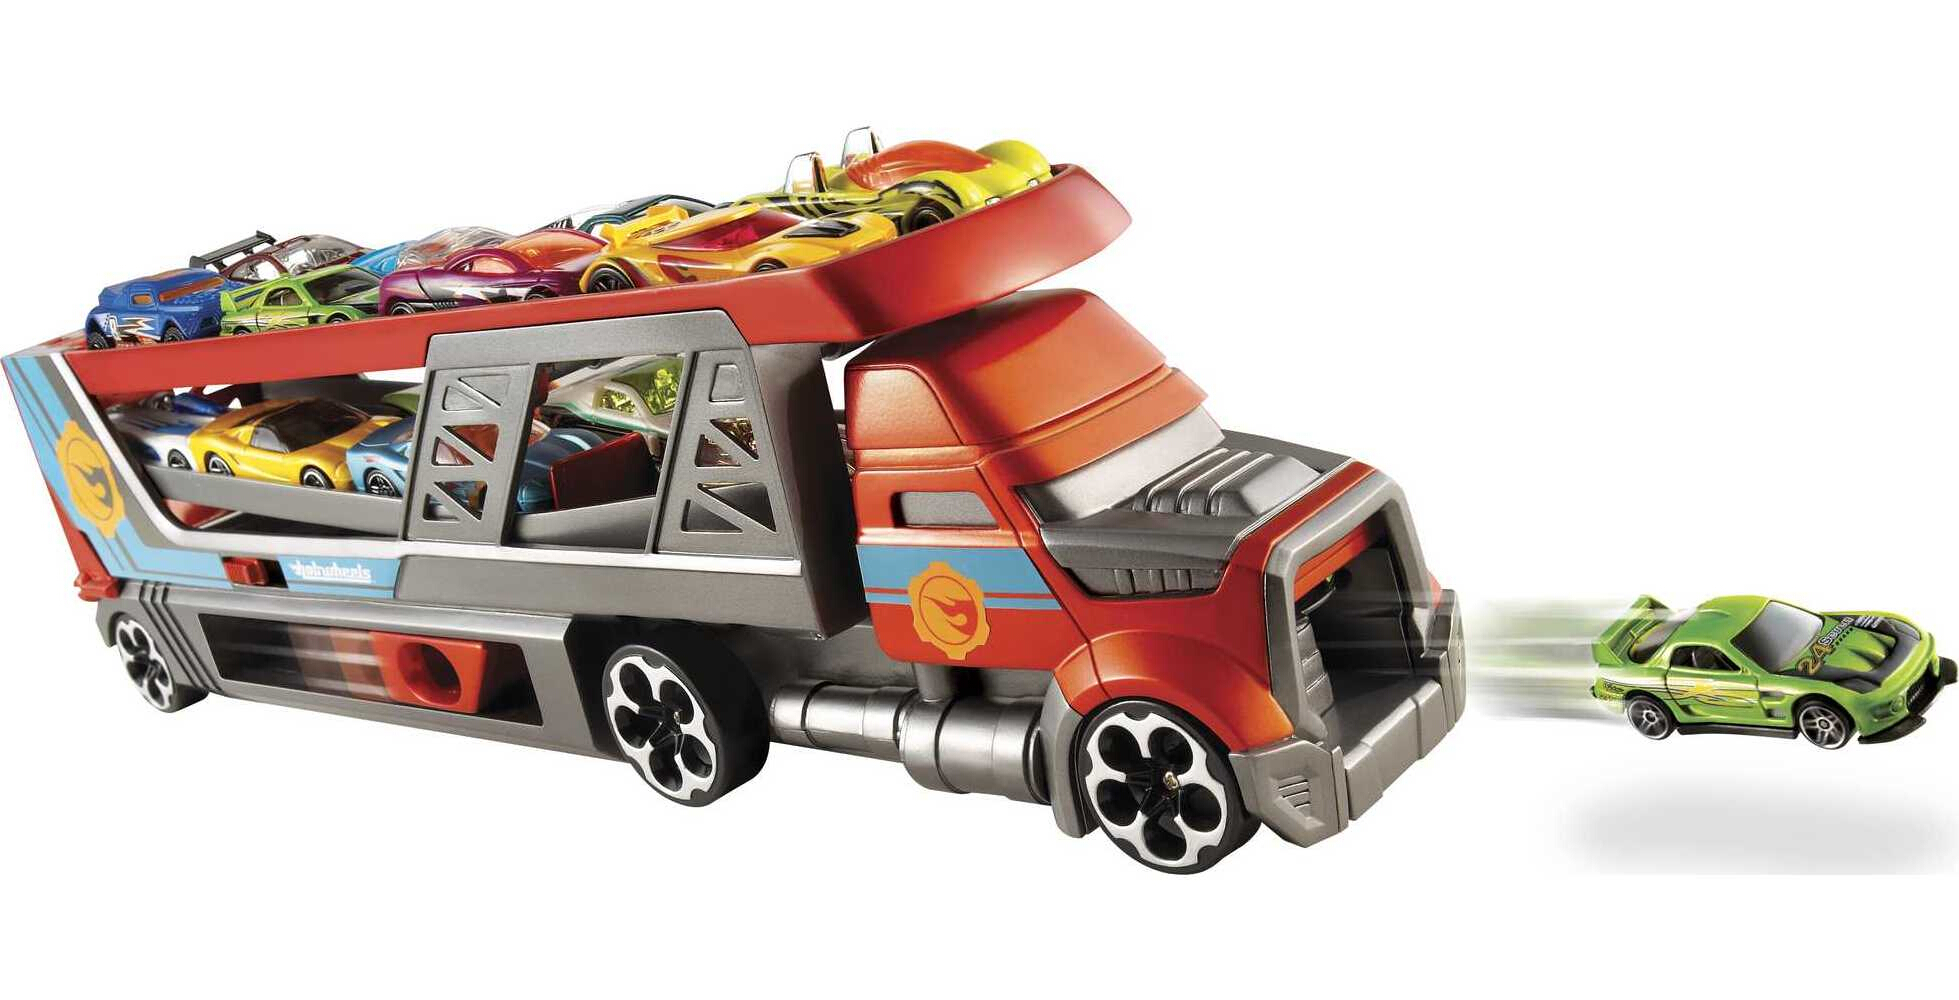 Hot Wheels City Blastin' Rig Hauler & 3 Toy Cars in 1:64 Scale, Launcher & Storage (4 Vehicles) - image 3 of 6